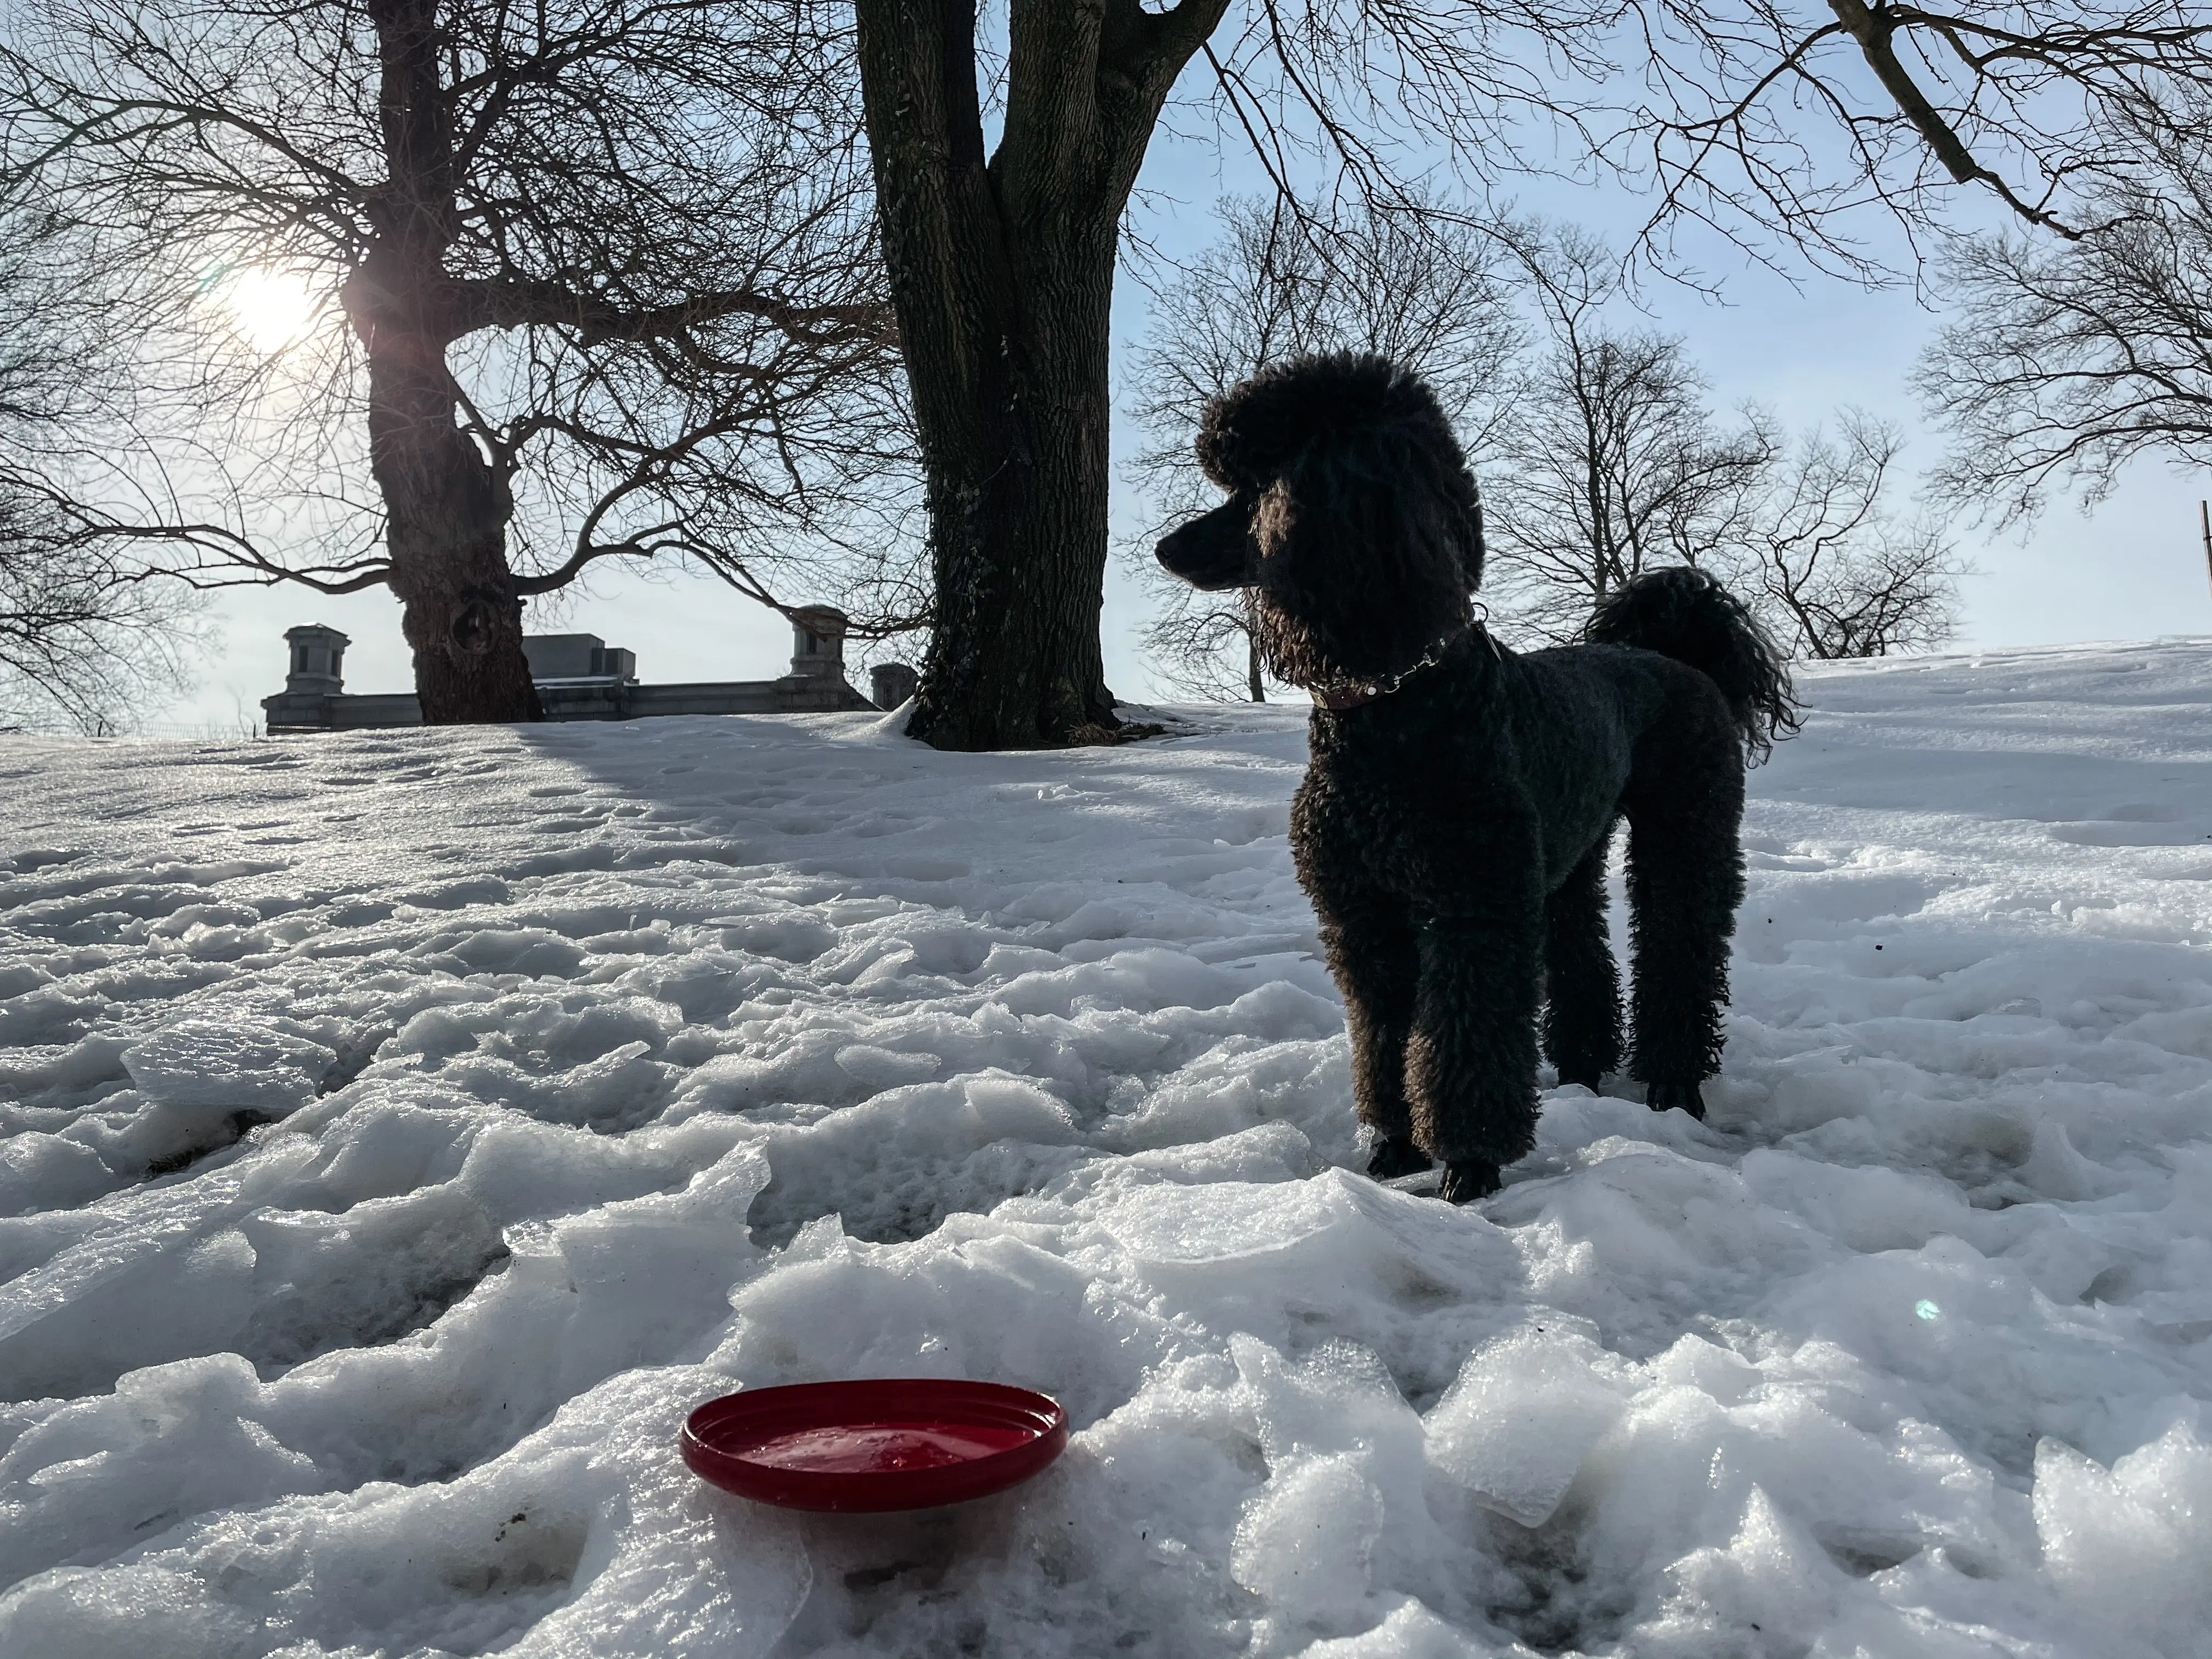 Byron the Poodle with Disc